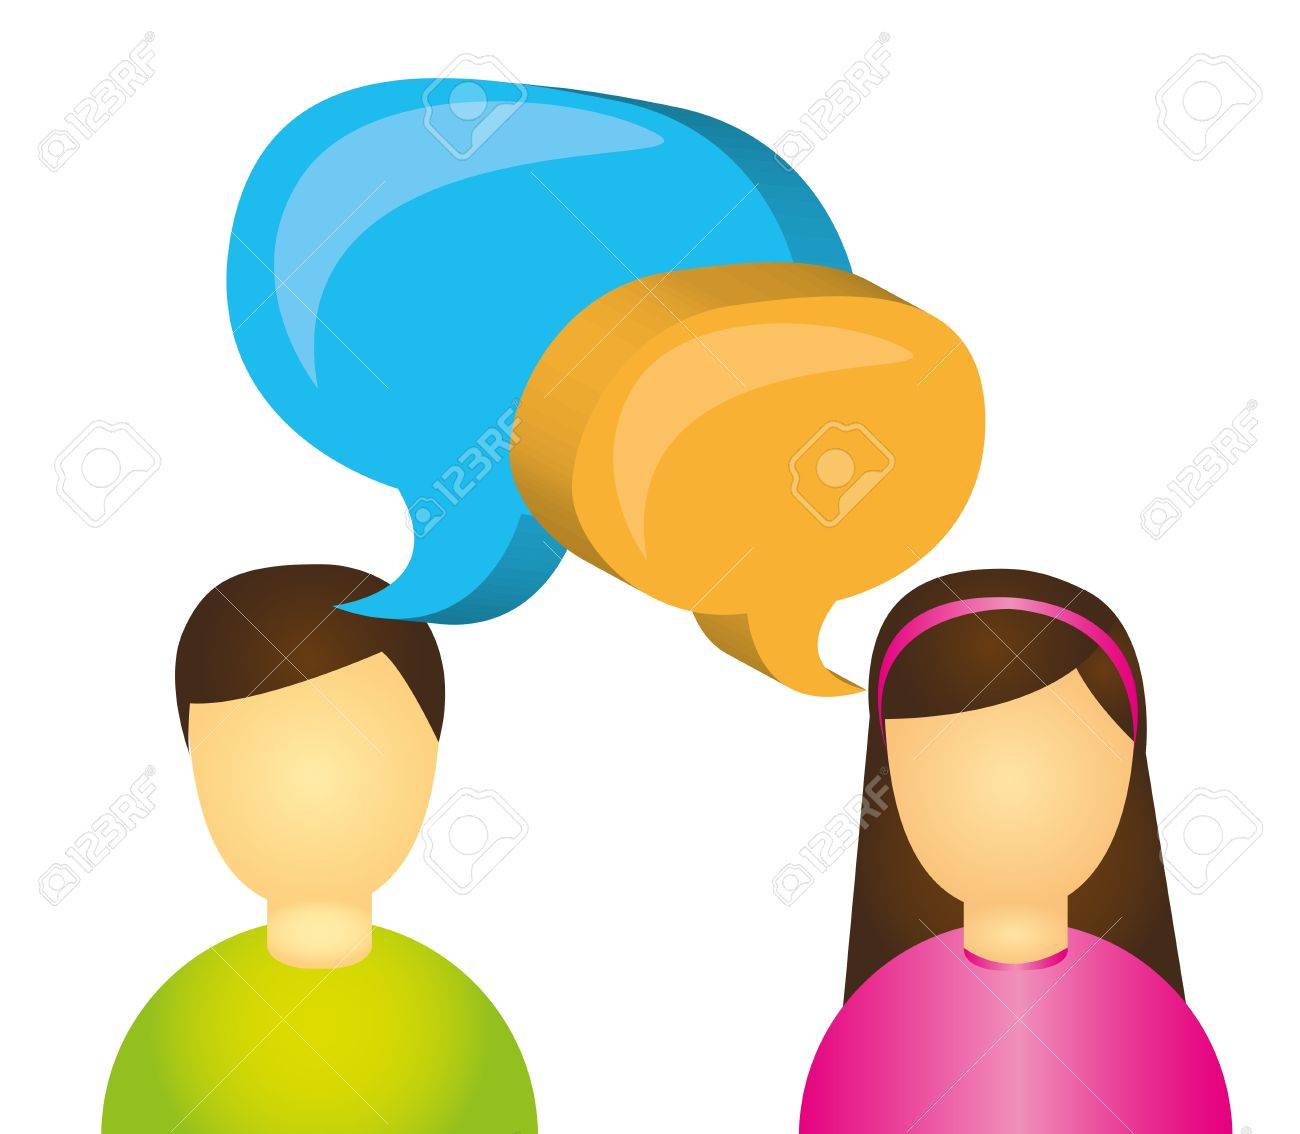 People With Thought Bubbles Isolated Over White Background Vector